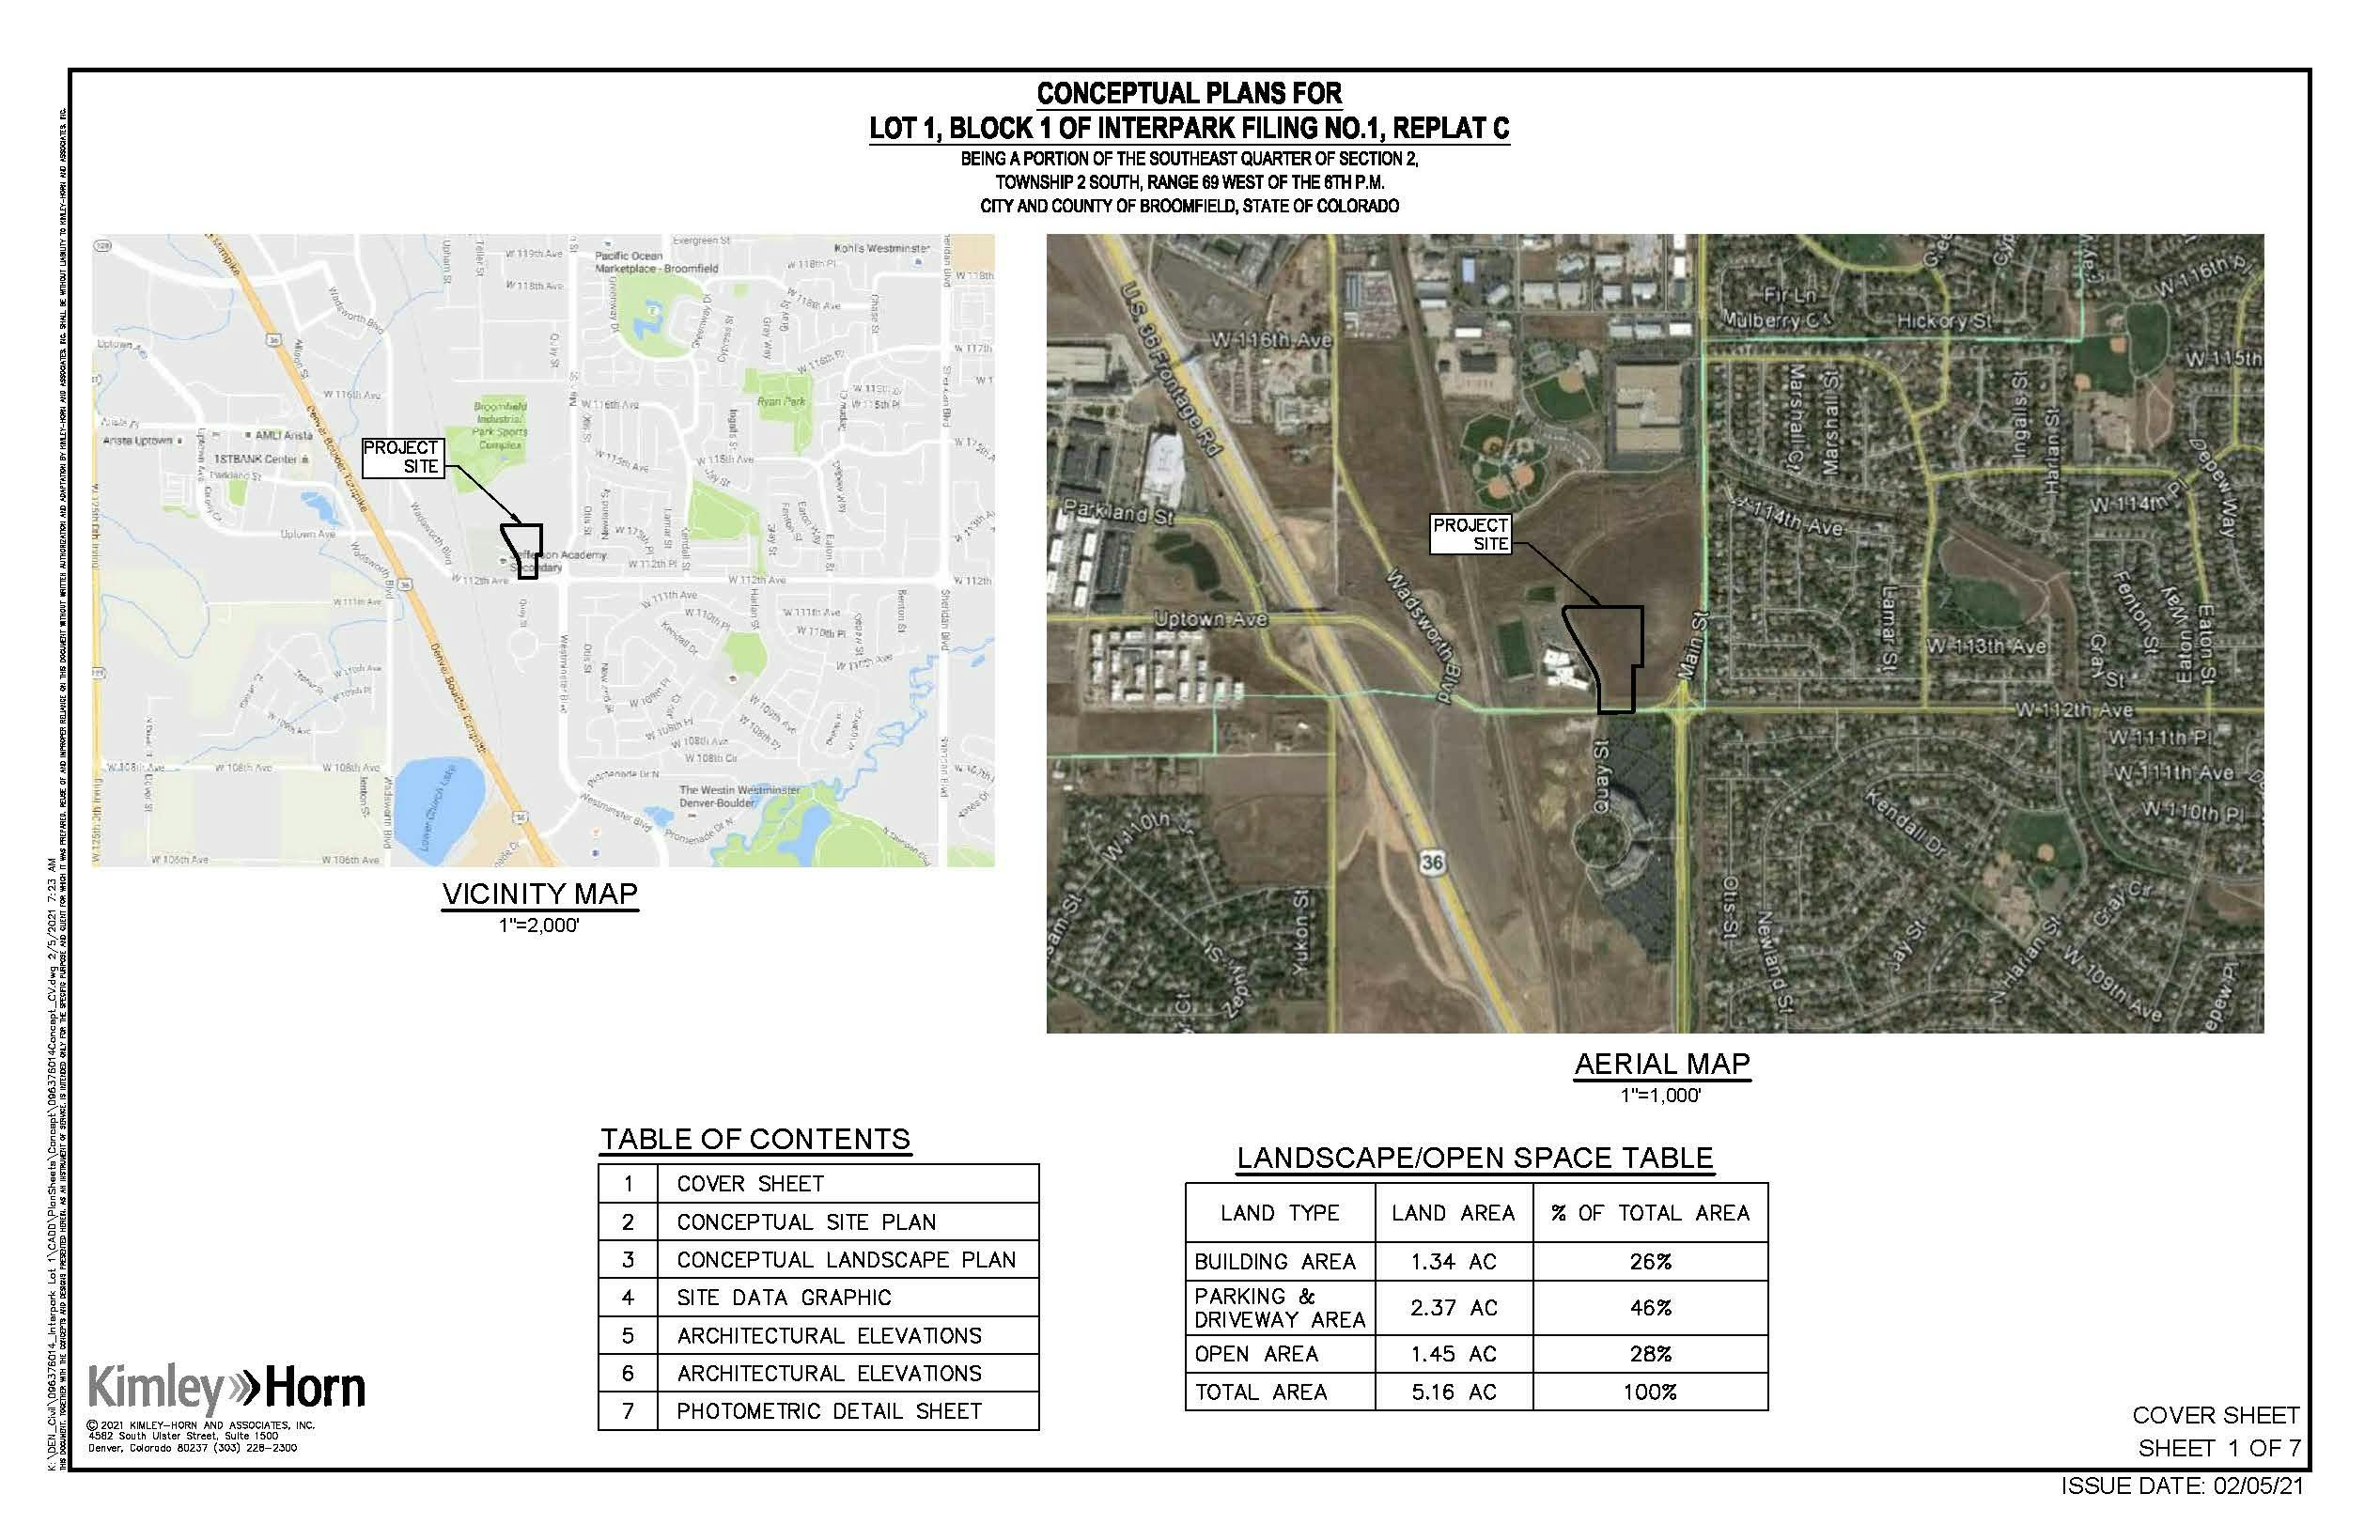 Interpark Lot 1 - vicinity map and aerial.jpg